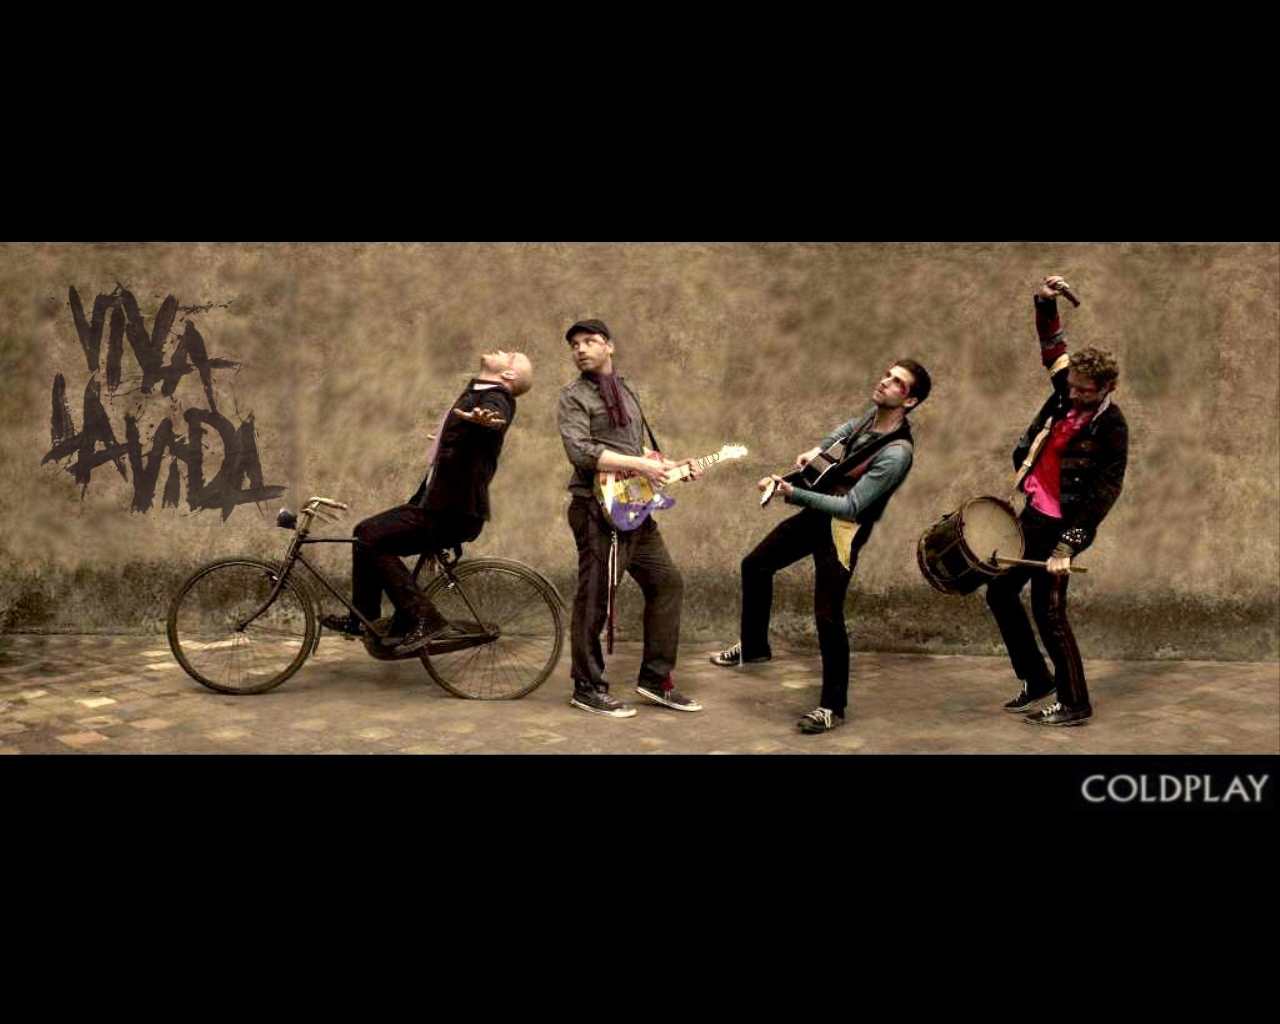 Coldplay Image HD Wallpaper And Background Photos